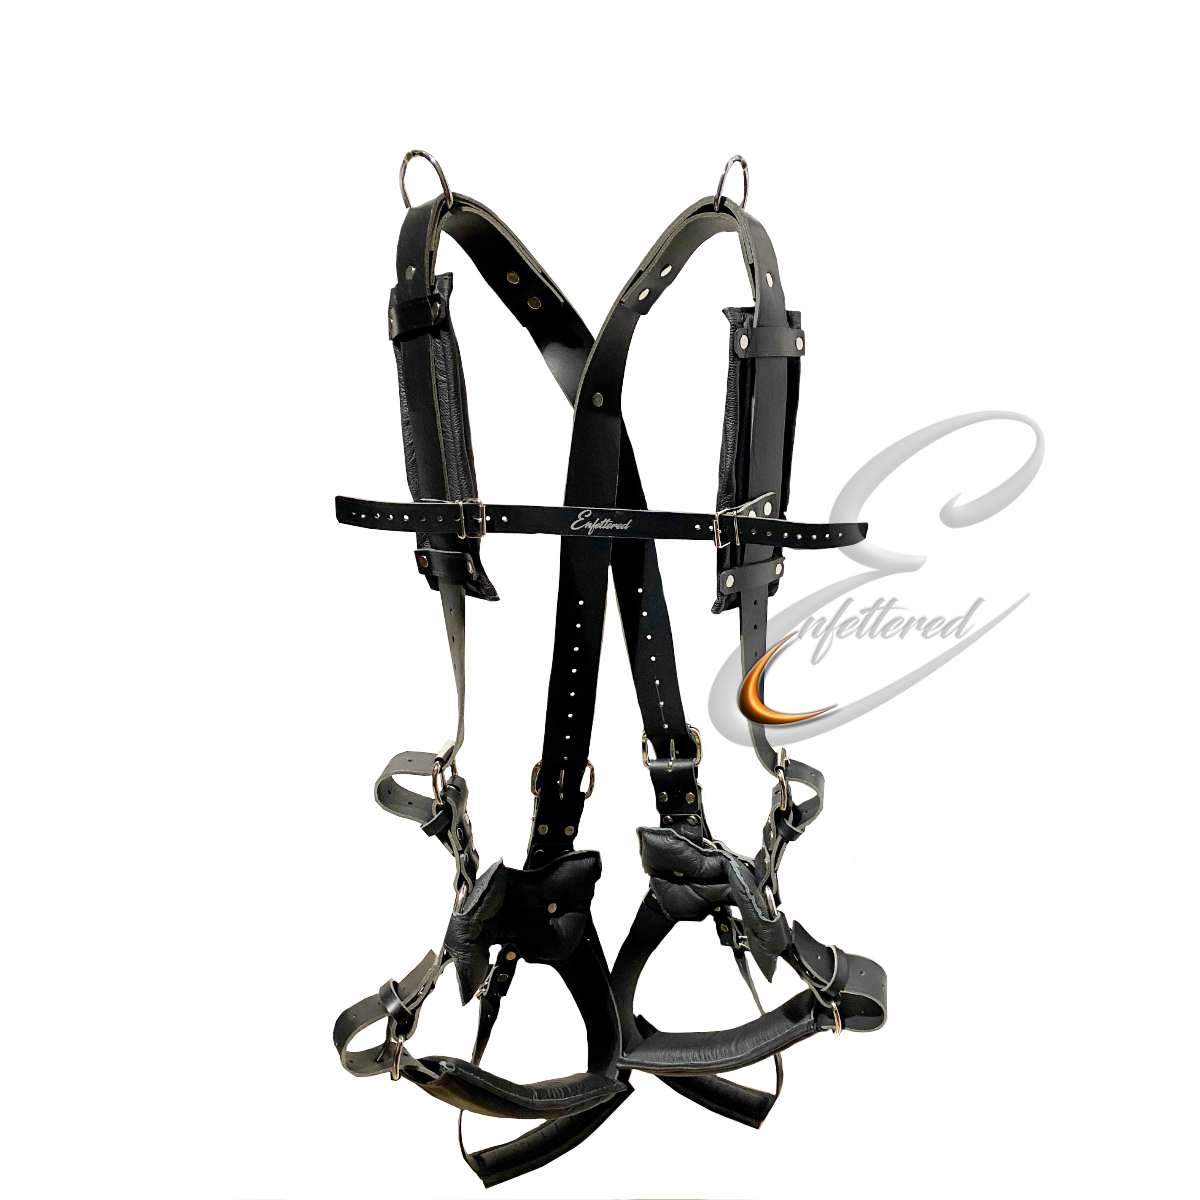 Enfettered Leather Bondage Suspension Harness with Foot Support